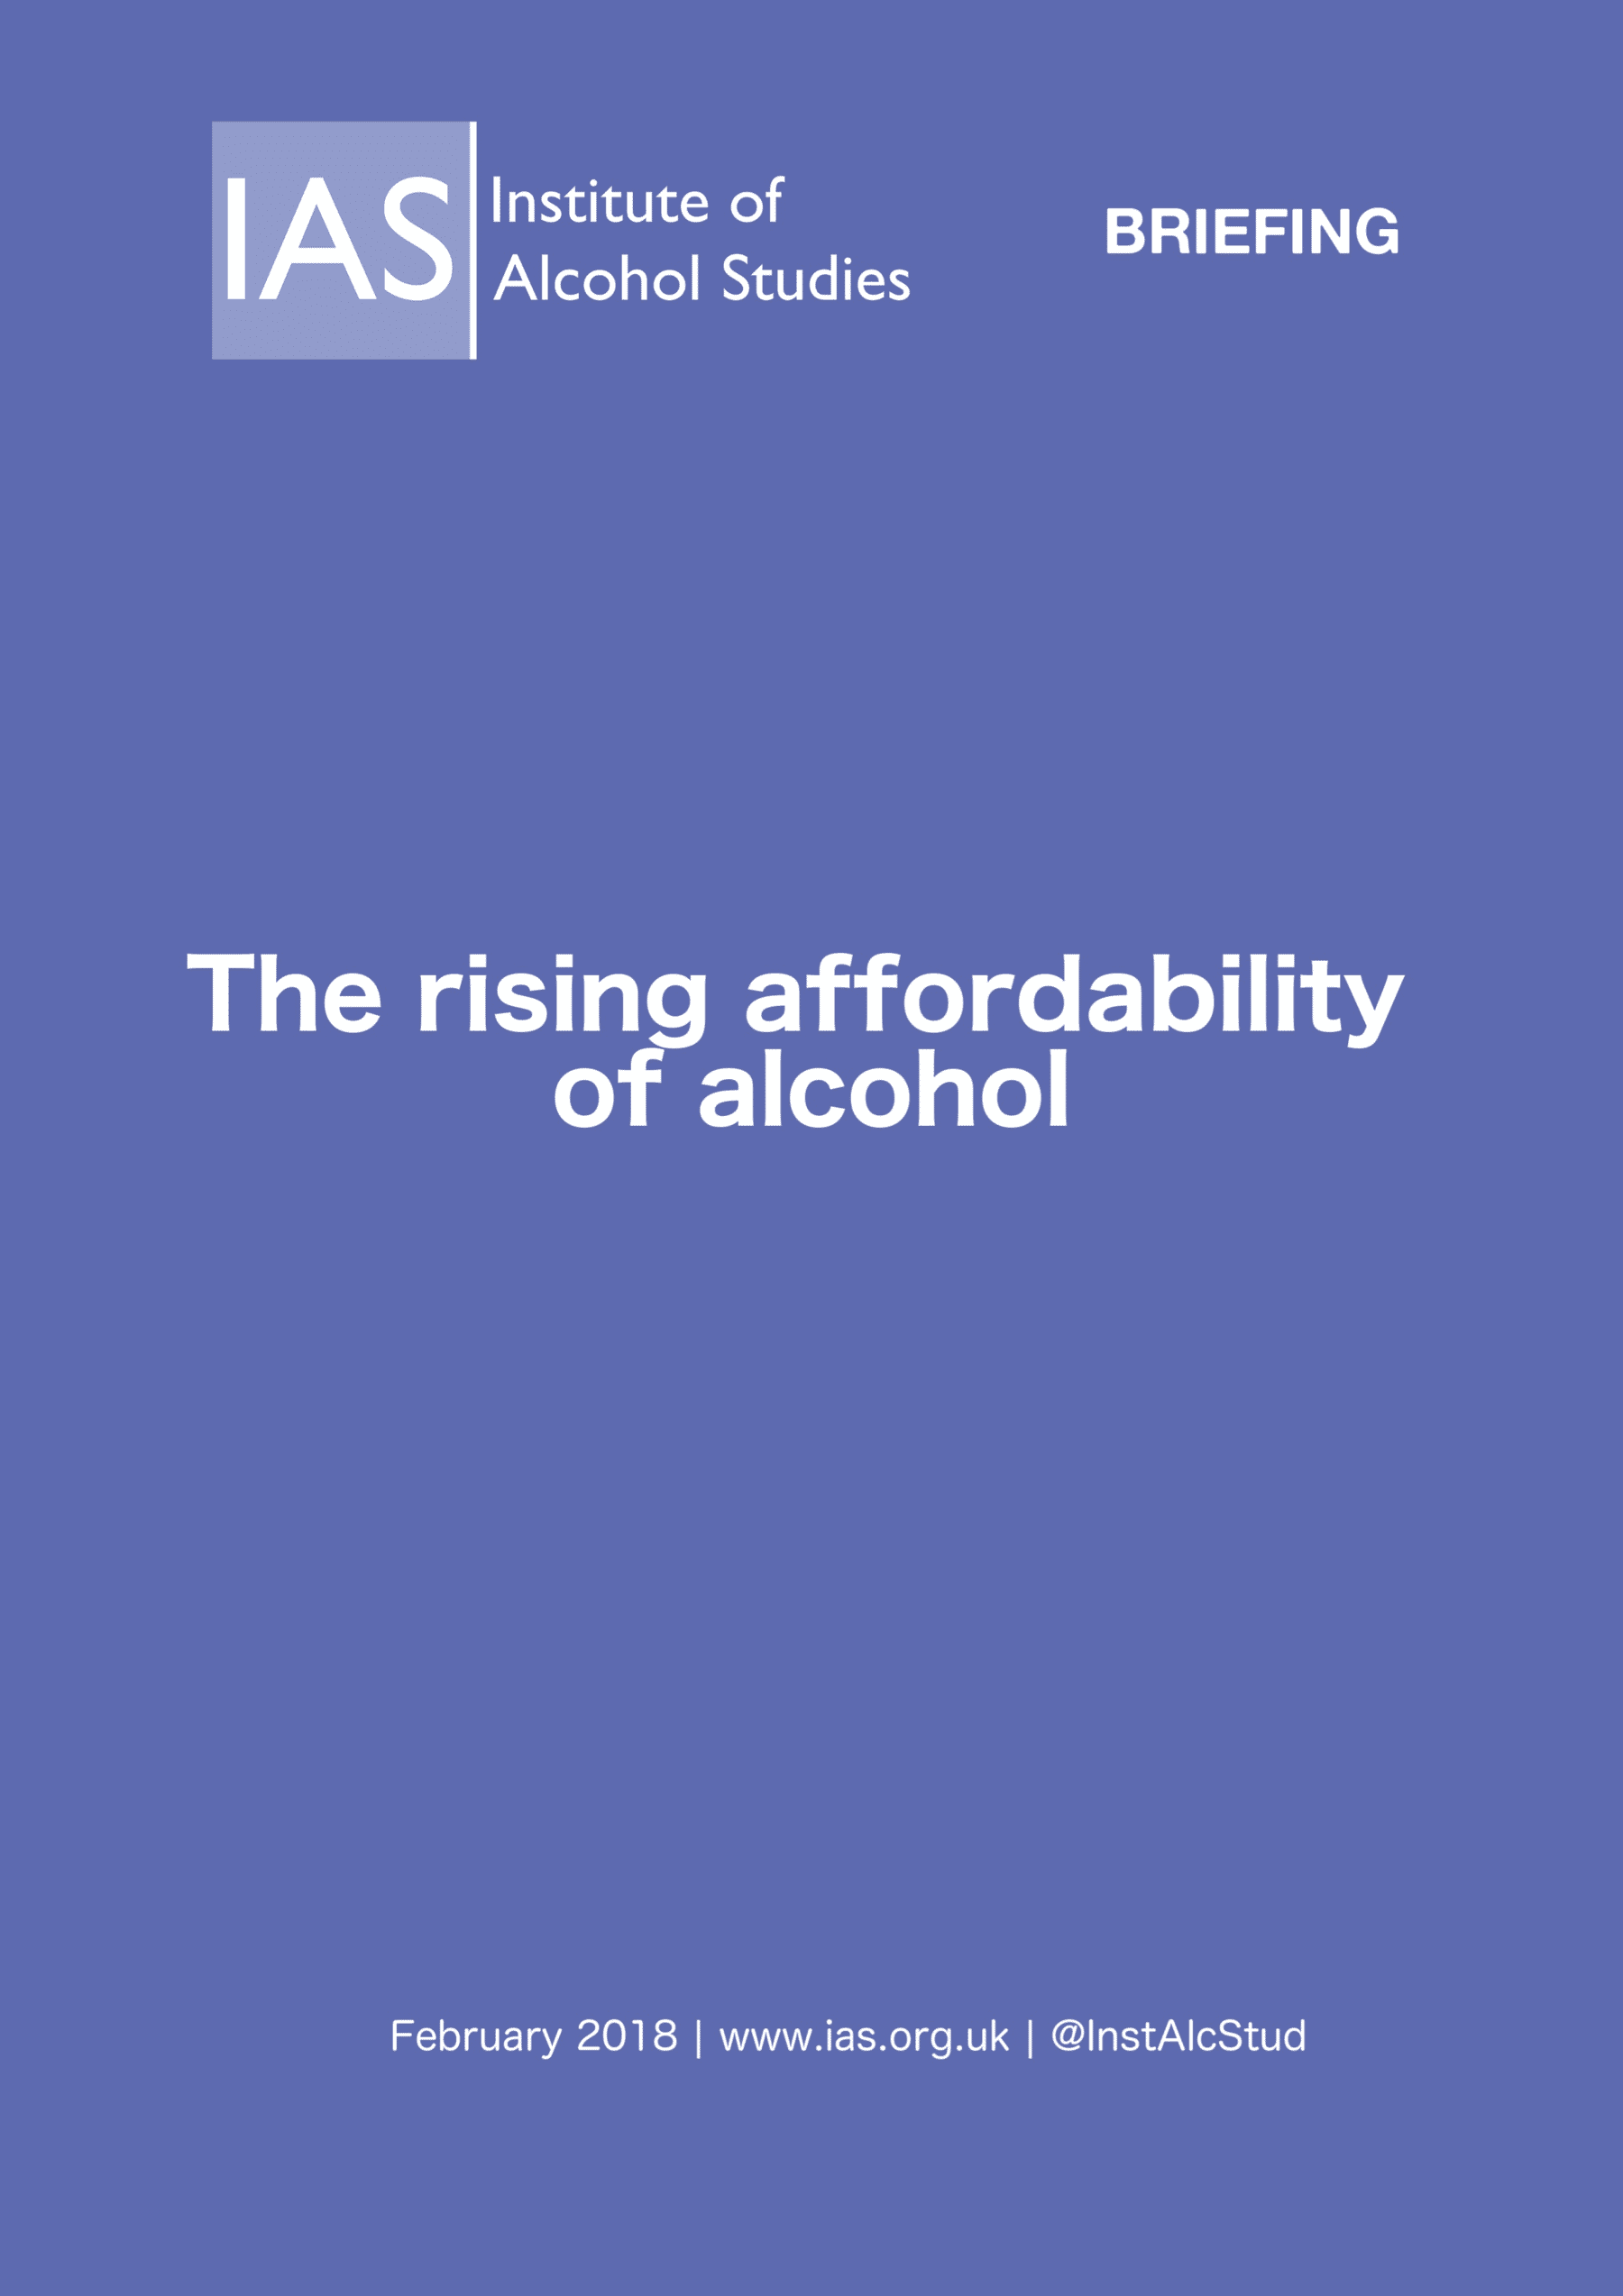 The rising affordability of alcohol